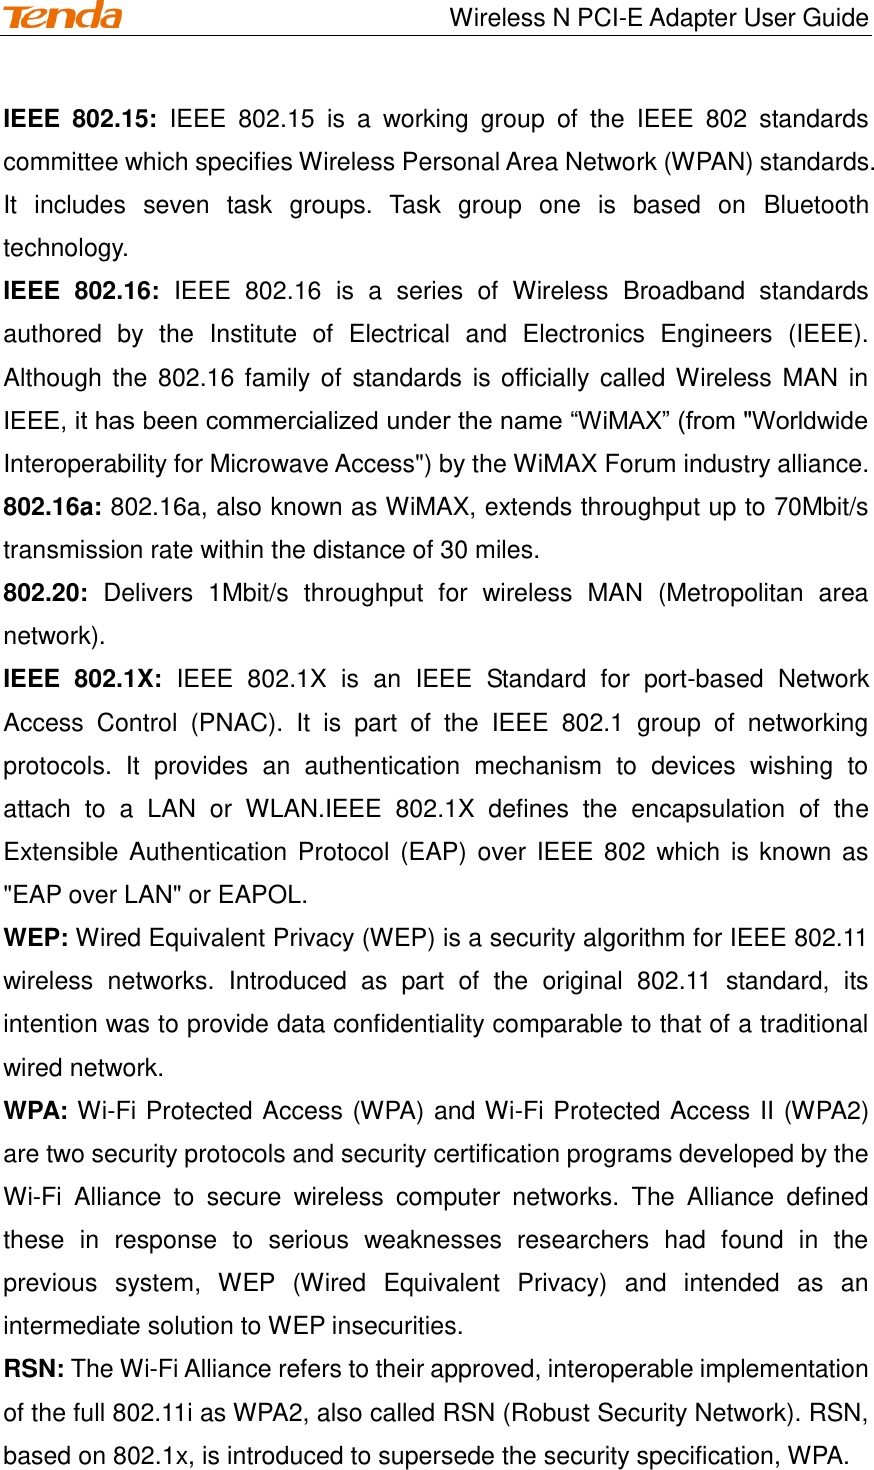                                    Wireless N PCI-E Adapter User Guide IEEE  802.15:  IEEE  802.15  is  a  working  group  of  the  IEEE  802  standards committee which specifies Wireless Personal Area Network (WPAN) standards. It  includes  seven  task  groups.  Task  group  one  is  based  on  Bluetooth technology. IEEE  802.16:  IEEE  802.16  is  a  series  of  Wireless  Broadband  standards authored  by  the  Institute  of  Electrical  and  Electronics  Engineers  (IEEE).   Although the 802.16 family of standards is officially called Wireless MAN in IEEE, it has been commercialized under the name “WiMAX” (from &quot;Worldwide Interoperability for Microwave Access&quot;) by the WiMAX Forum industry alliance. 802.16a: 802.16a, also known as WiMAX, extends throughput up to 70Mbit/s transmission rate within the distance of 30 miles. 802.20:  Delivers  1Mbit/s  throughput  for  wireless  MAN  (Metropolitan  area network). IEEE  802.1X:  IEEE  802.1X  is  an  IEEE  Standard  for  port-based  Network Access  Control  (PNAC).  It  is  part  of  the  IEEE  802.1  group  of  networking protocols.  It  provides  an  authentication  mechanism  to  devices  wishing  to attach  to  a  LAN  or  WLAN.IEEE  802.1X  defines  the  encapsulation  of  the Extensible Authentication Protocol (EAP) over IEEE 802  which  is known as &quot;EAP over LAN&quot; or EAPOL. WEP: Wired Equivalent Privacy (WEP) is a security algorithm for IEEE 802.11 wireless  networks.  Introduced  as  part  of  the  original  802.11  standard,  its intention was to provide data confidentiality comparable to that of a traditional wired network. WPA: Wi-Fi Protected Access (WPA) and Wi-Fi Protected Access II (WPA2) are two security protocols and security certification programs developed by the Wi-Fi  Alliance  to  secure  wireless  computer  networks.  The  Alliance  defined these  in  response  to  serious  weaknesses  researchers  had  found  in  the previous  system,  WEP  (Wired  Equivalent  Privacy)  and  intended  as  an intermediate solution to WEP insecurities. RSN: The Wi-Fi Alliance refers to their approved, interoperable implementation of the full 802.11i as WPA2, also called RSN (Robust Security Network). RSN, based on 802.1x, is introduced to supersede the security specification, WPA.  